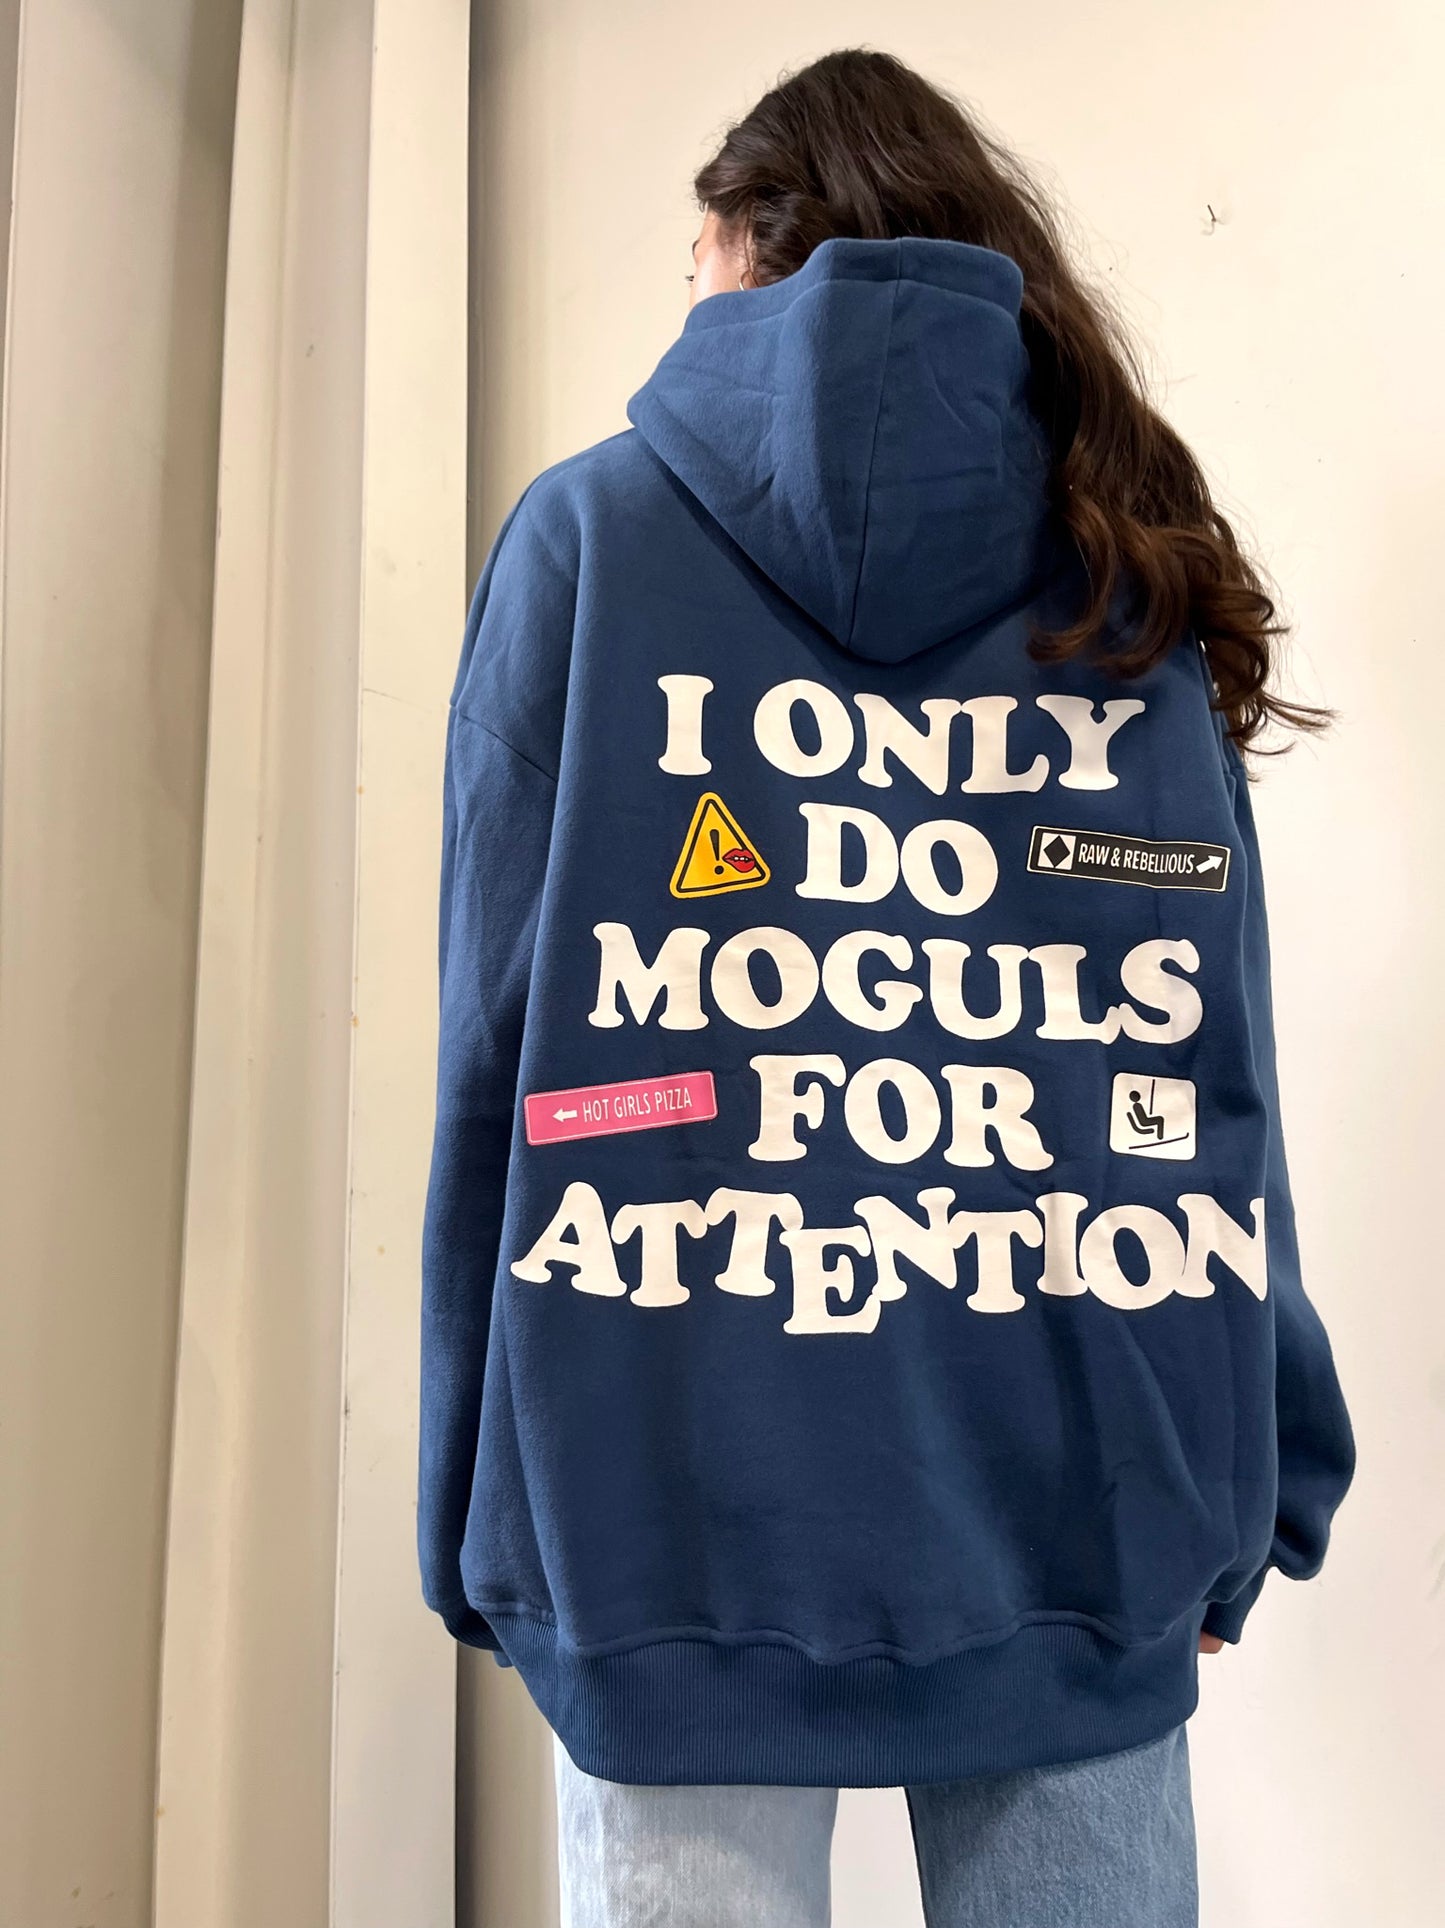 “Moguls for Attention” Hoodie